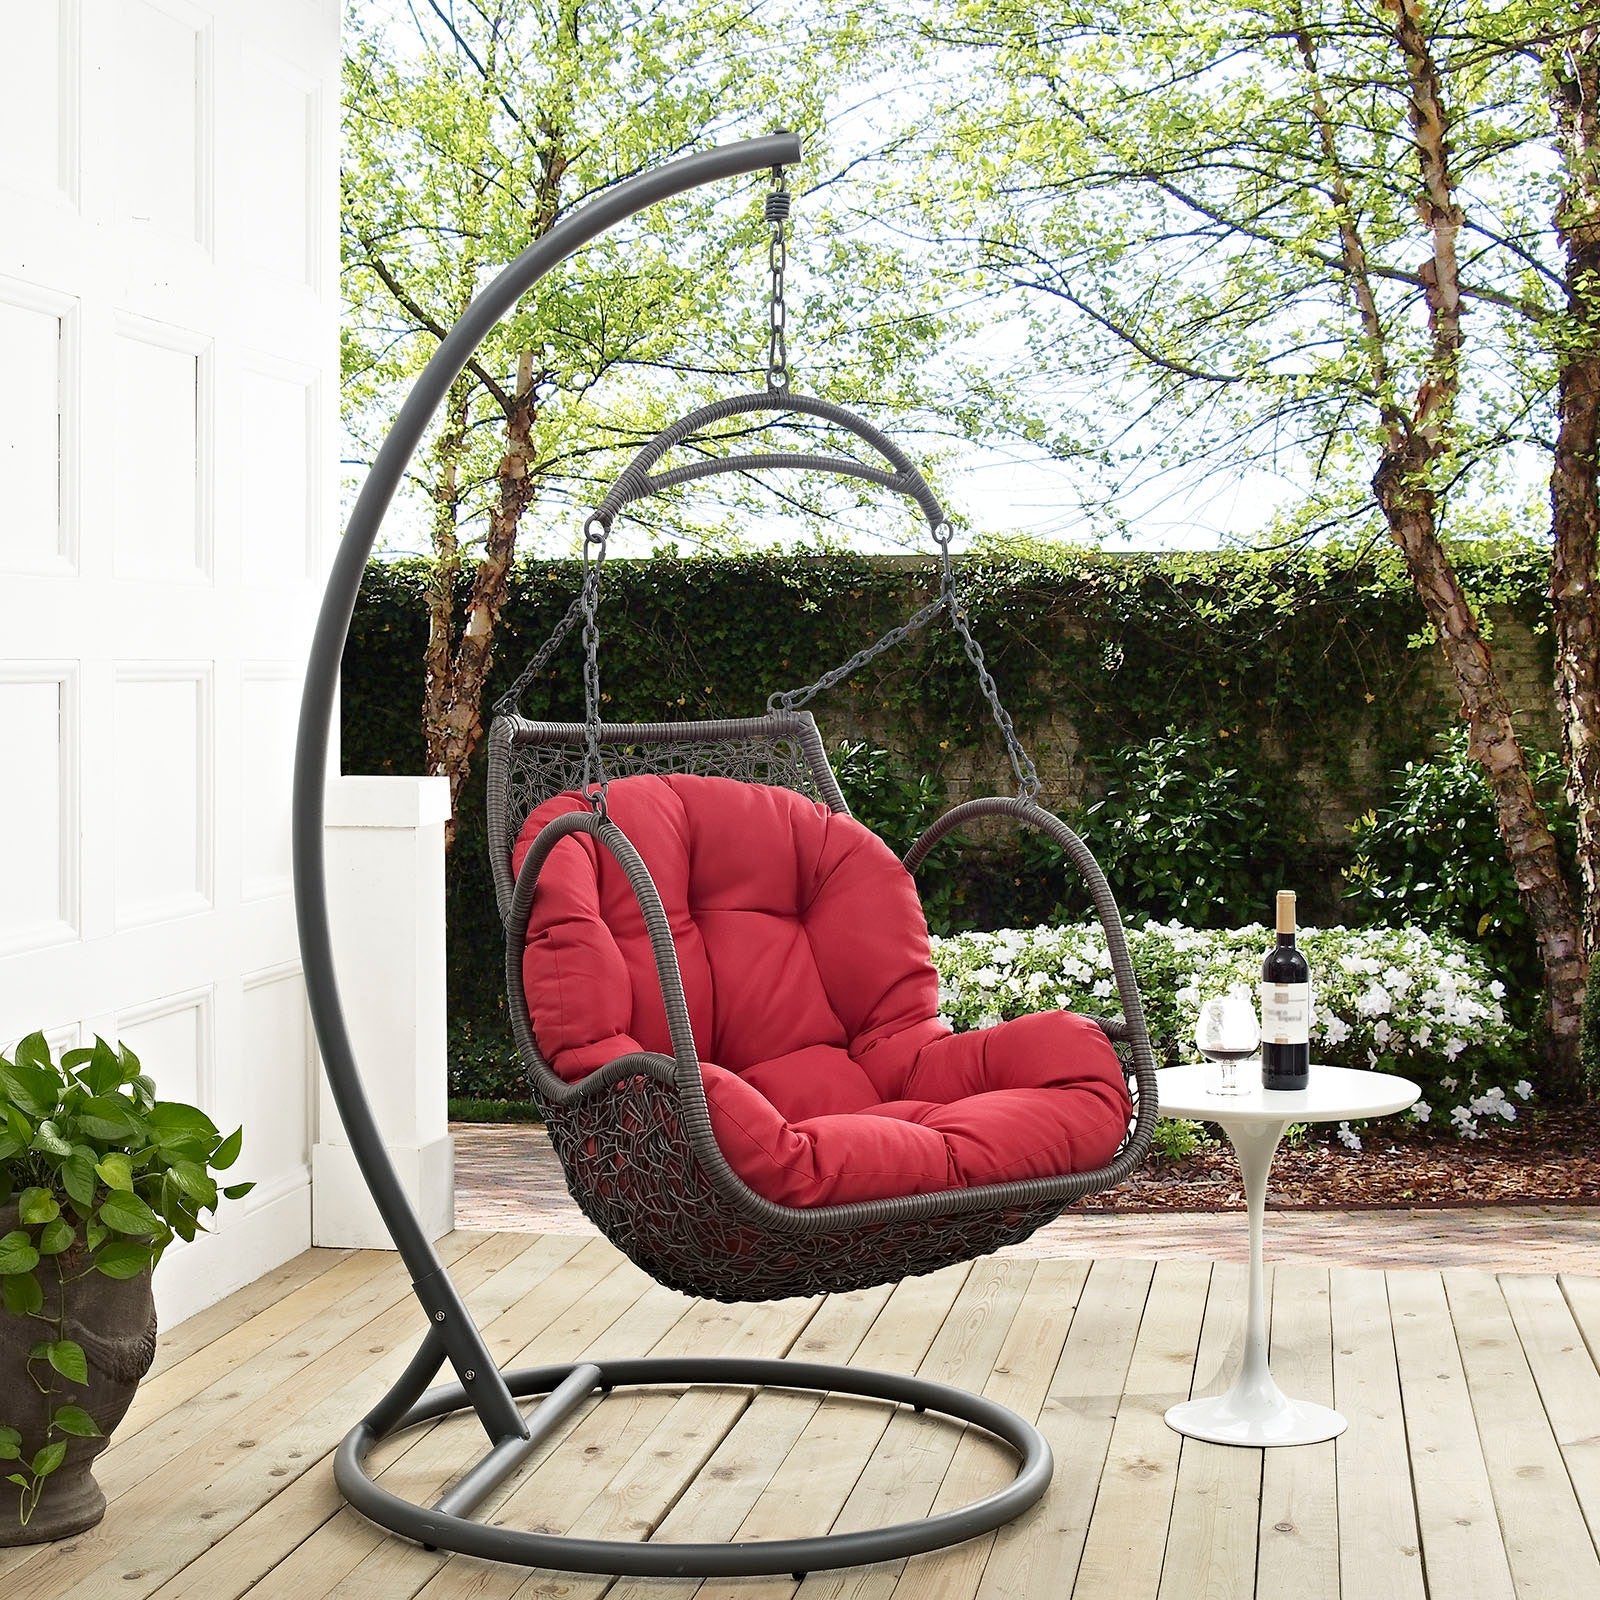 Arbor Outdoor Patio Wood Swing Chair - Red